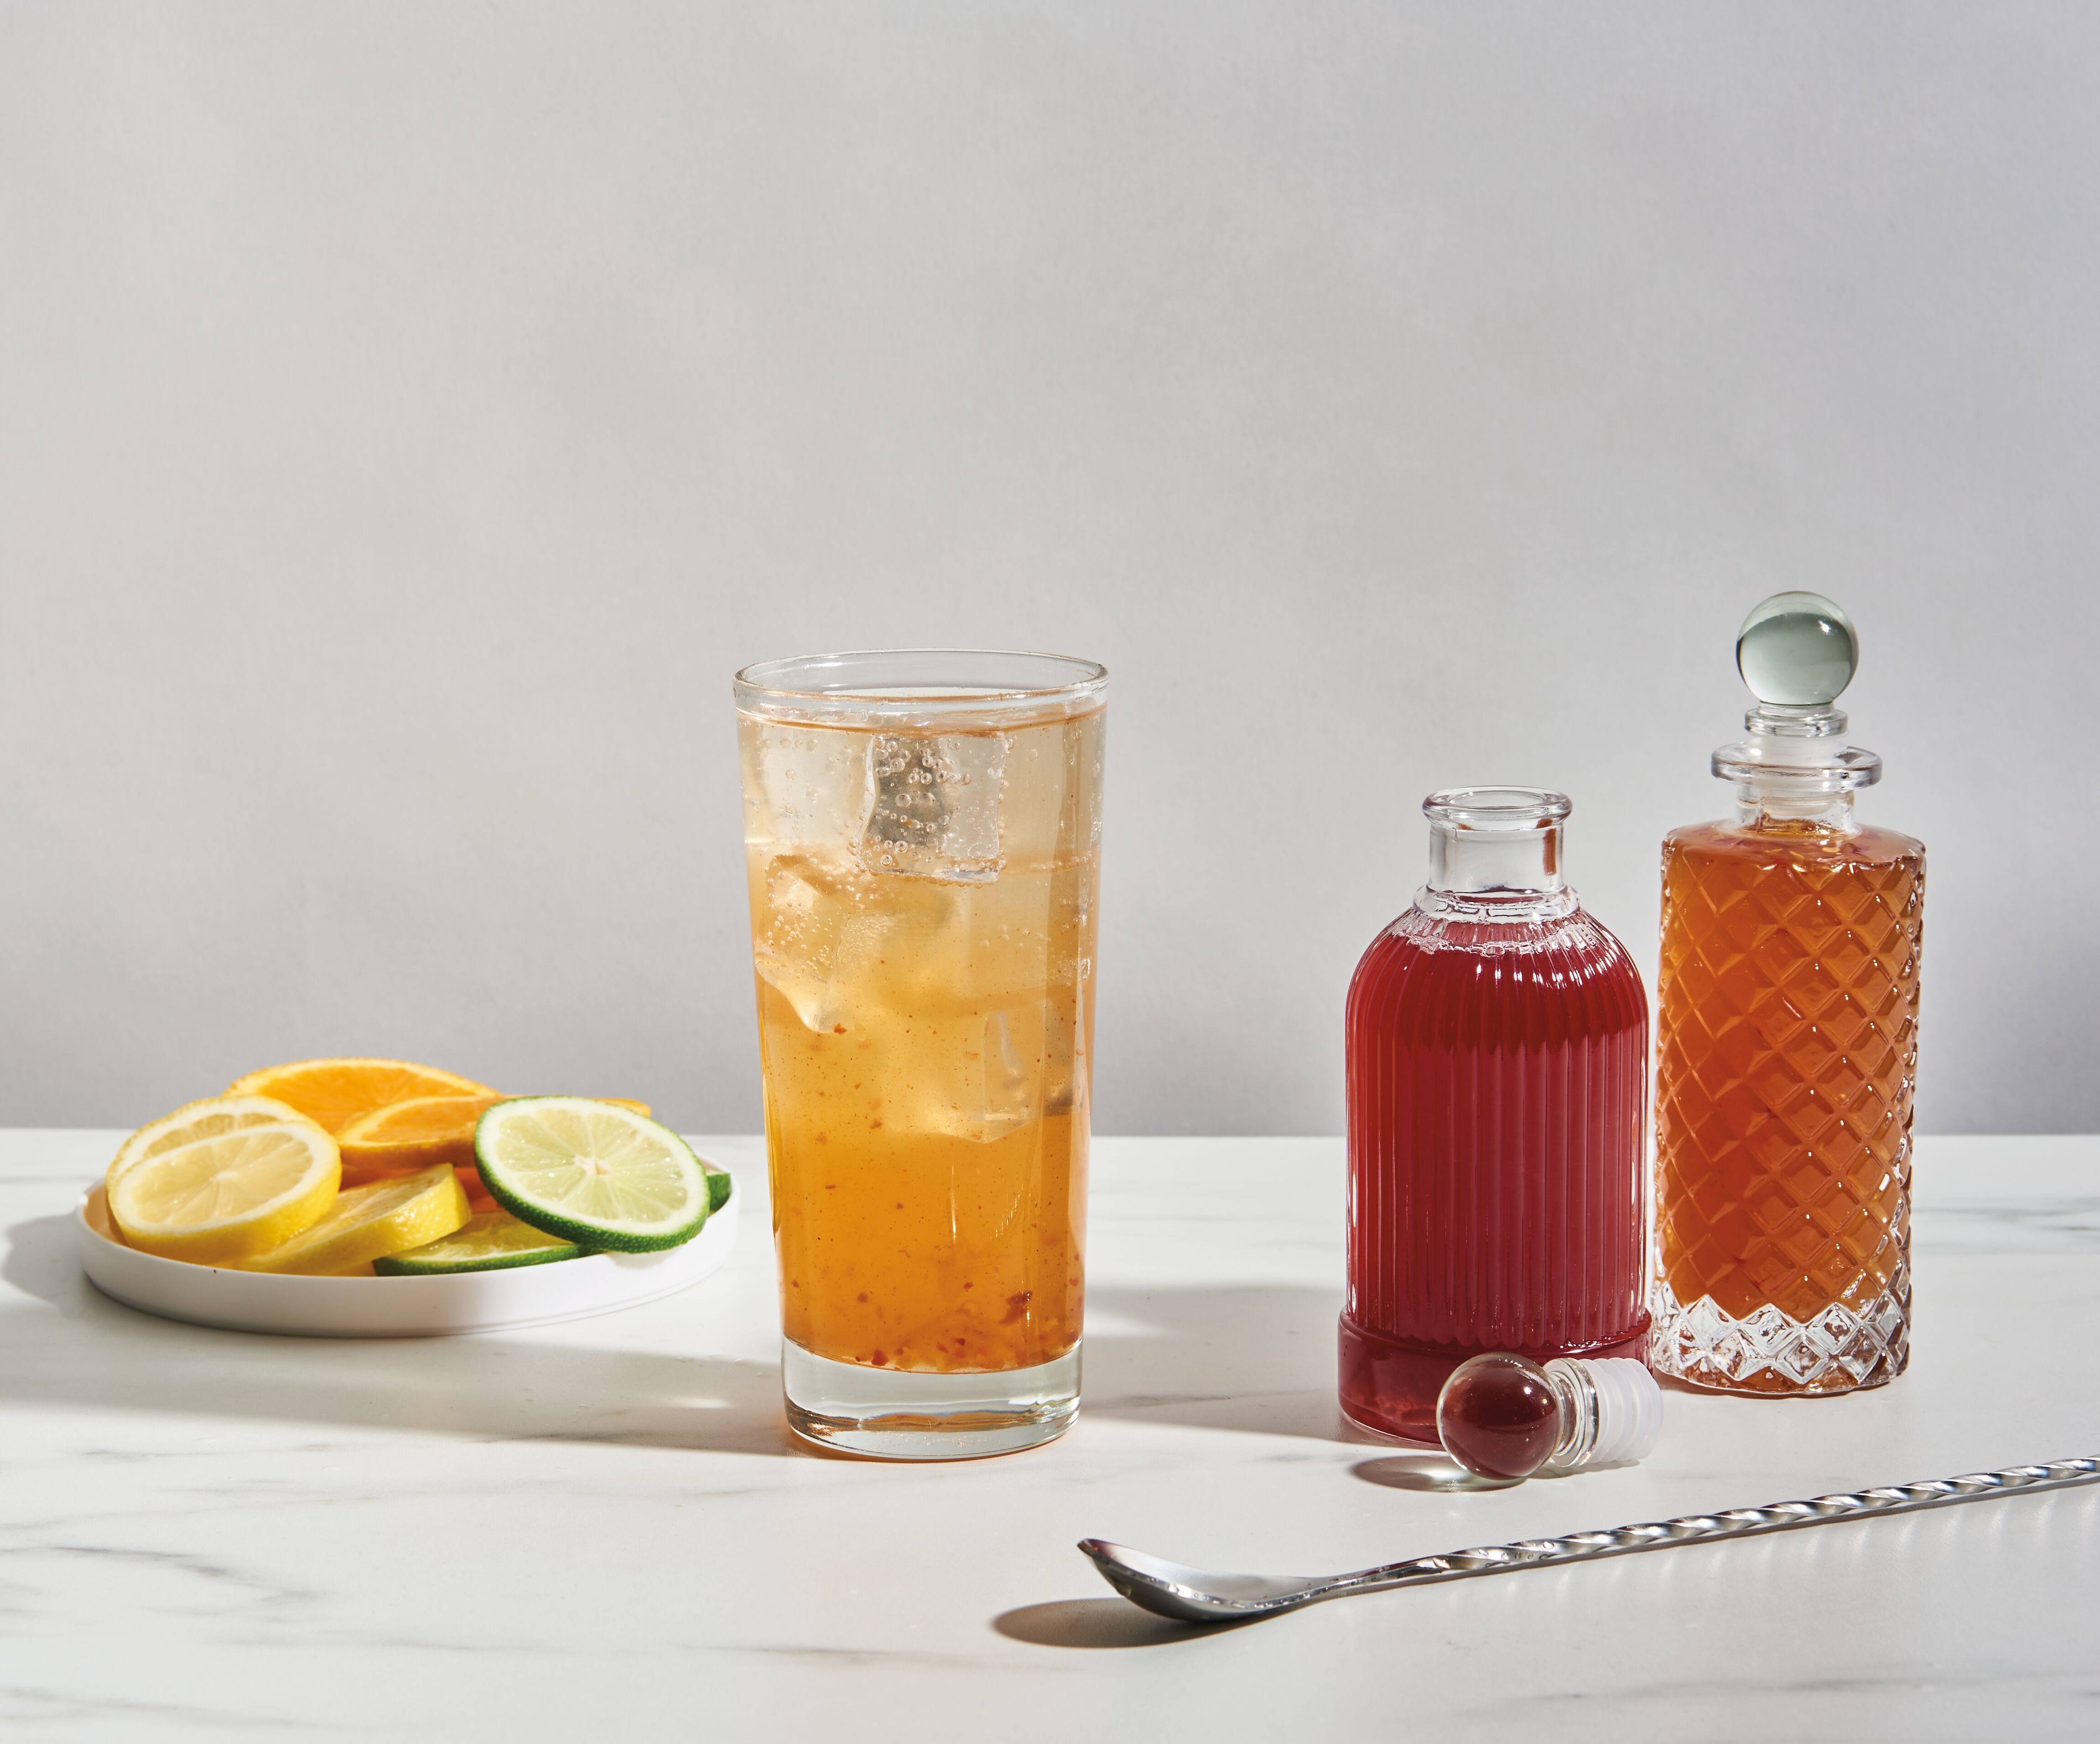 Not-So-Simple Syrups